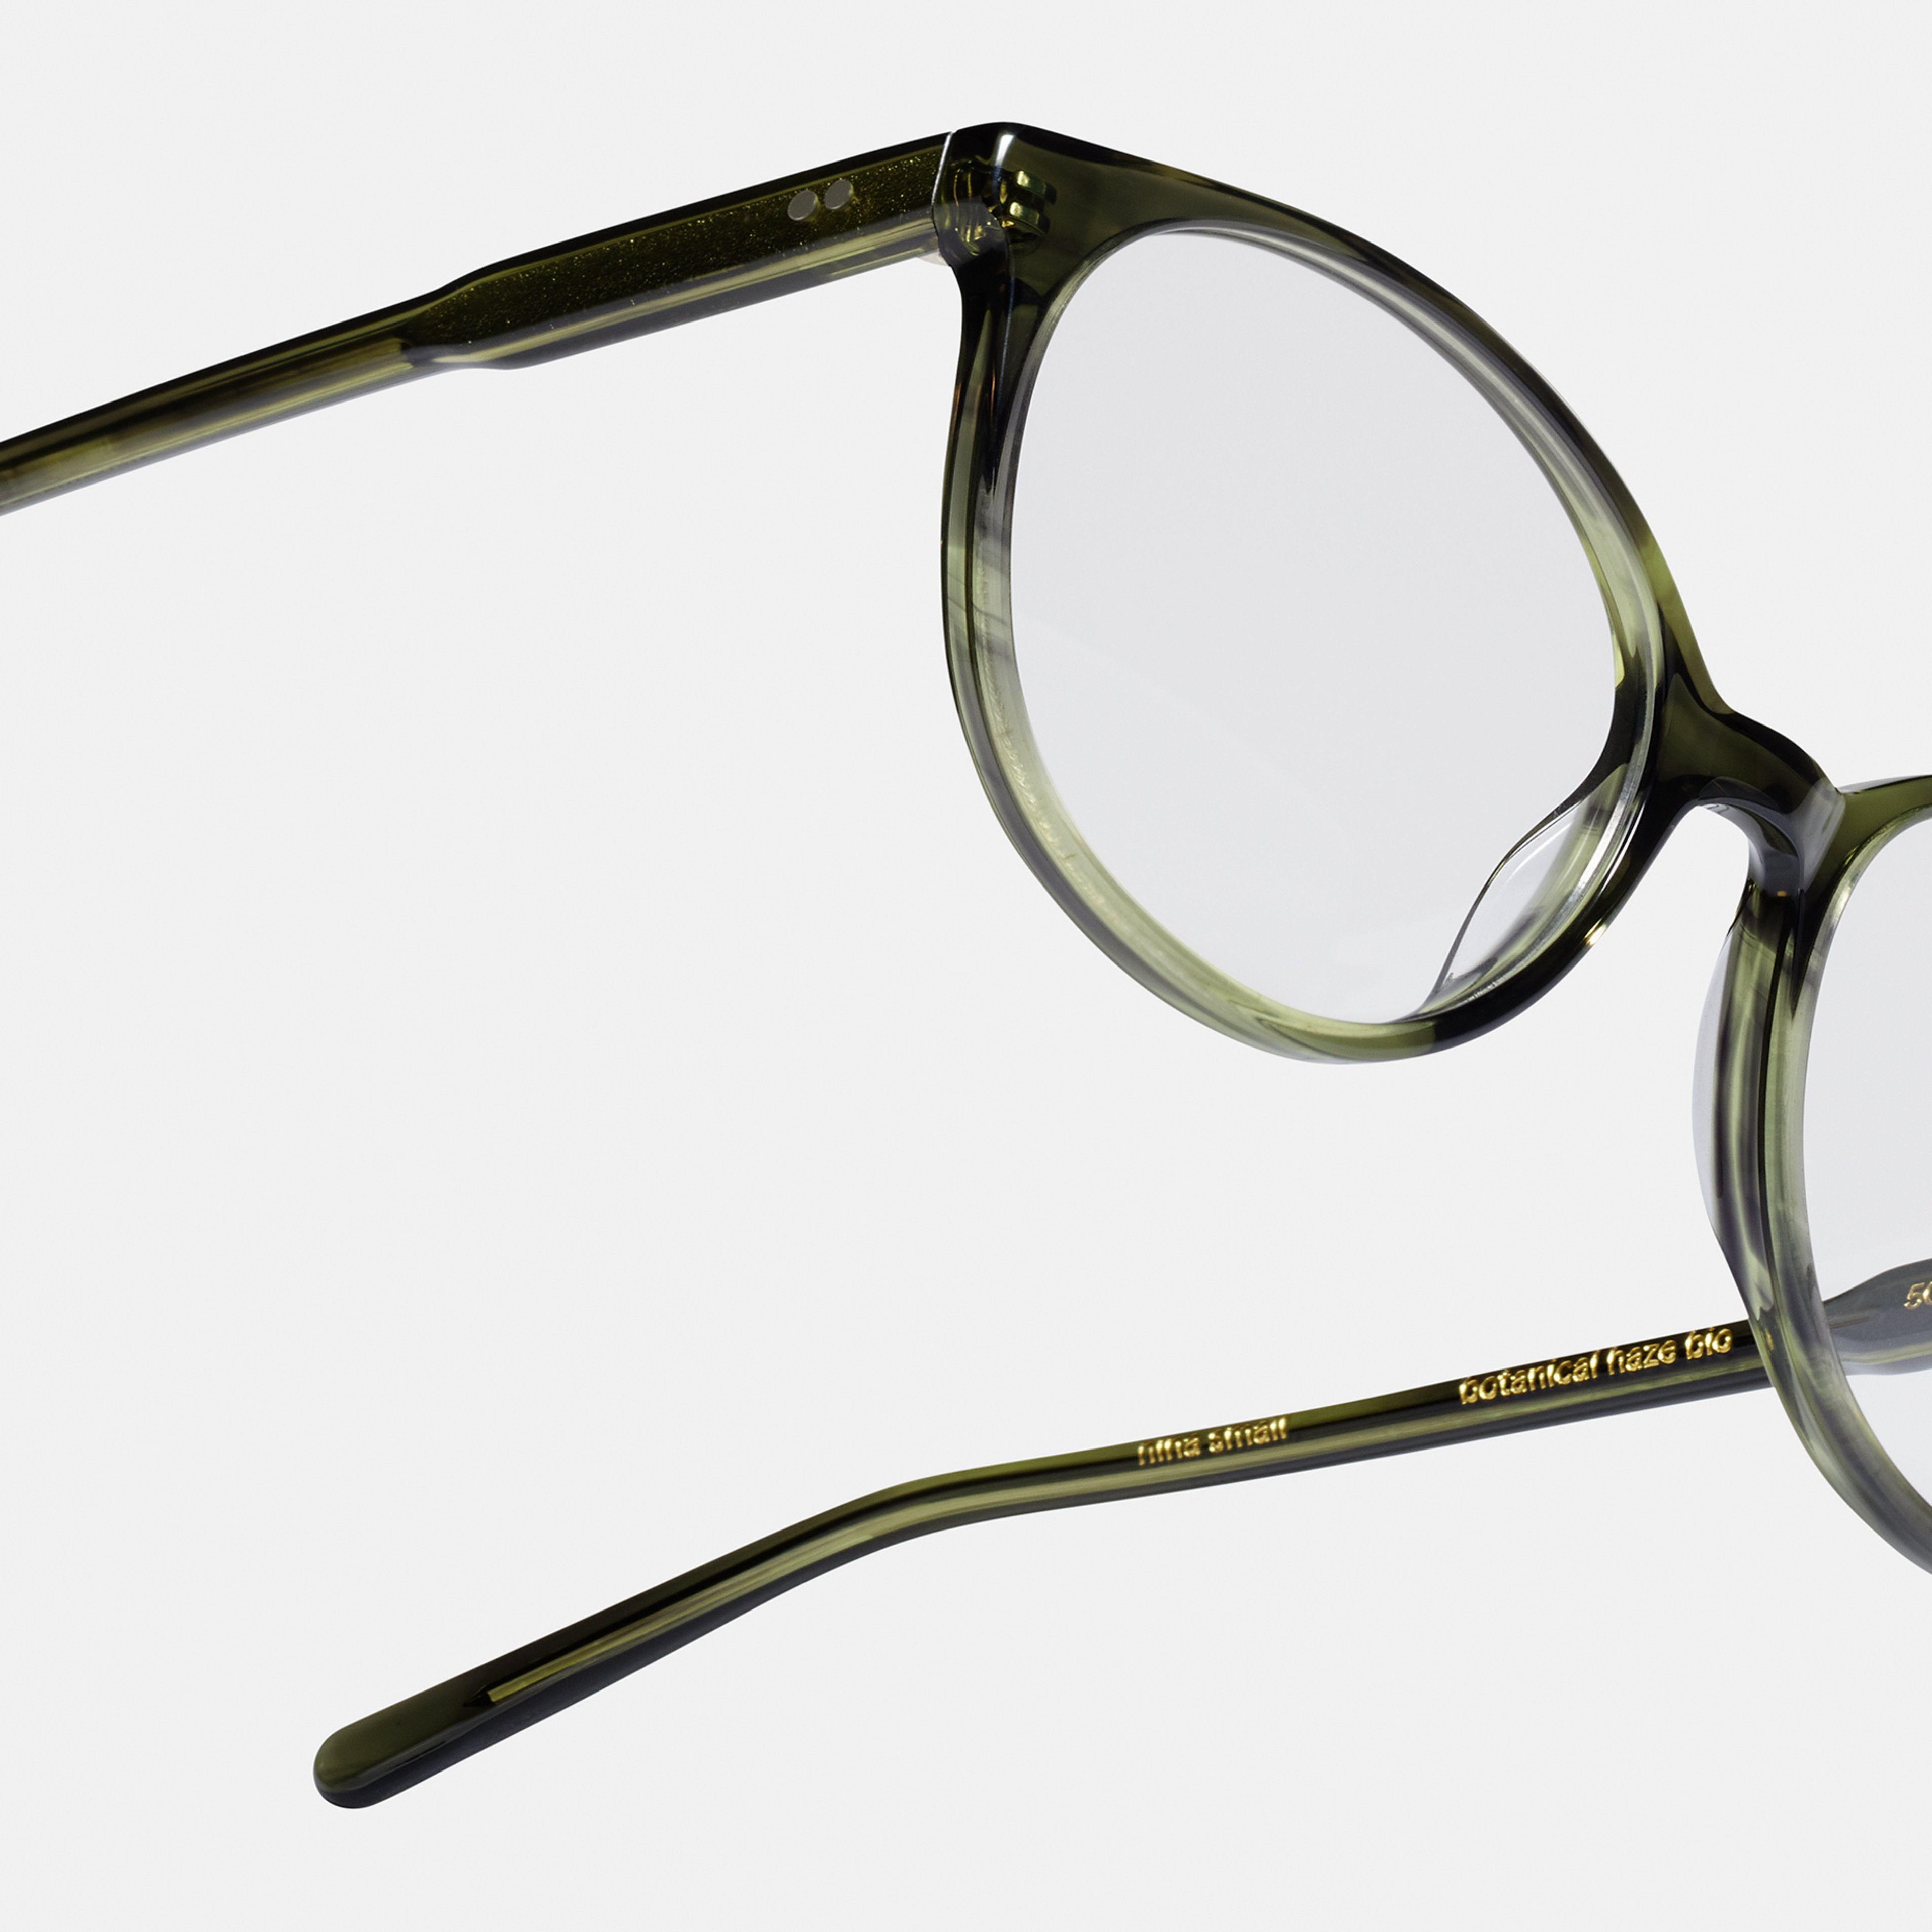 Ace & Tate Glasses | oval Acetate in Green